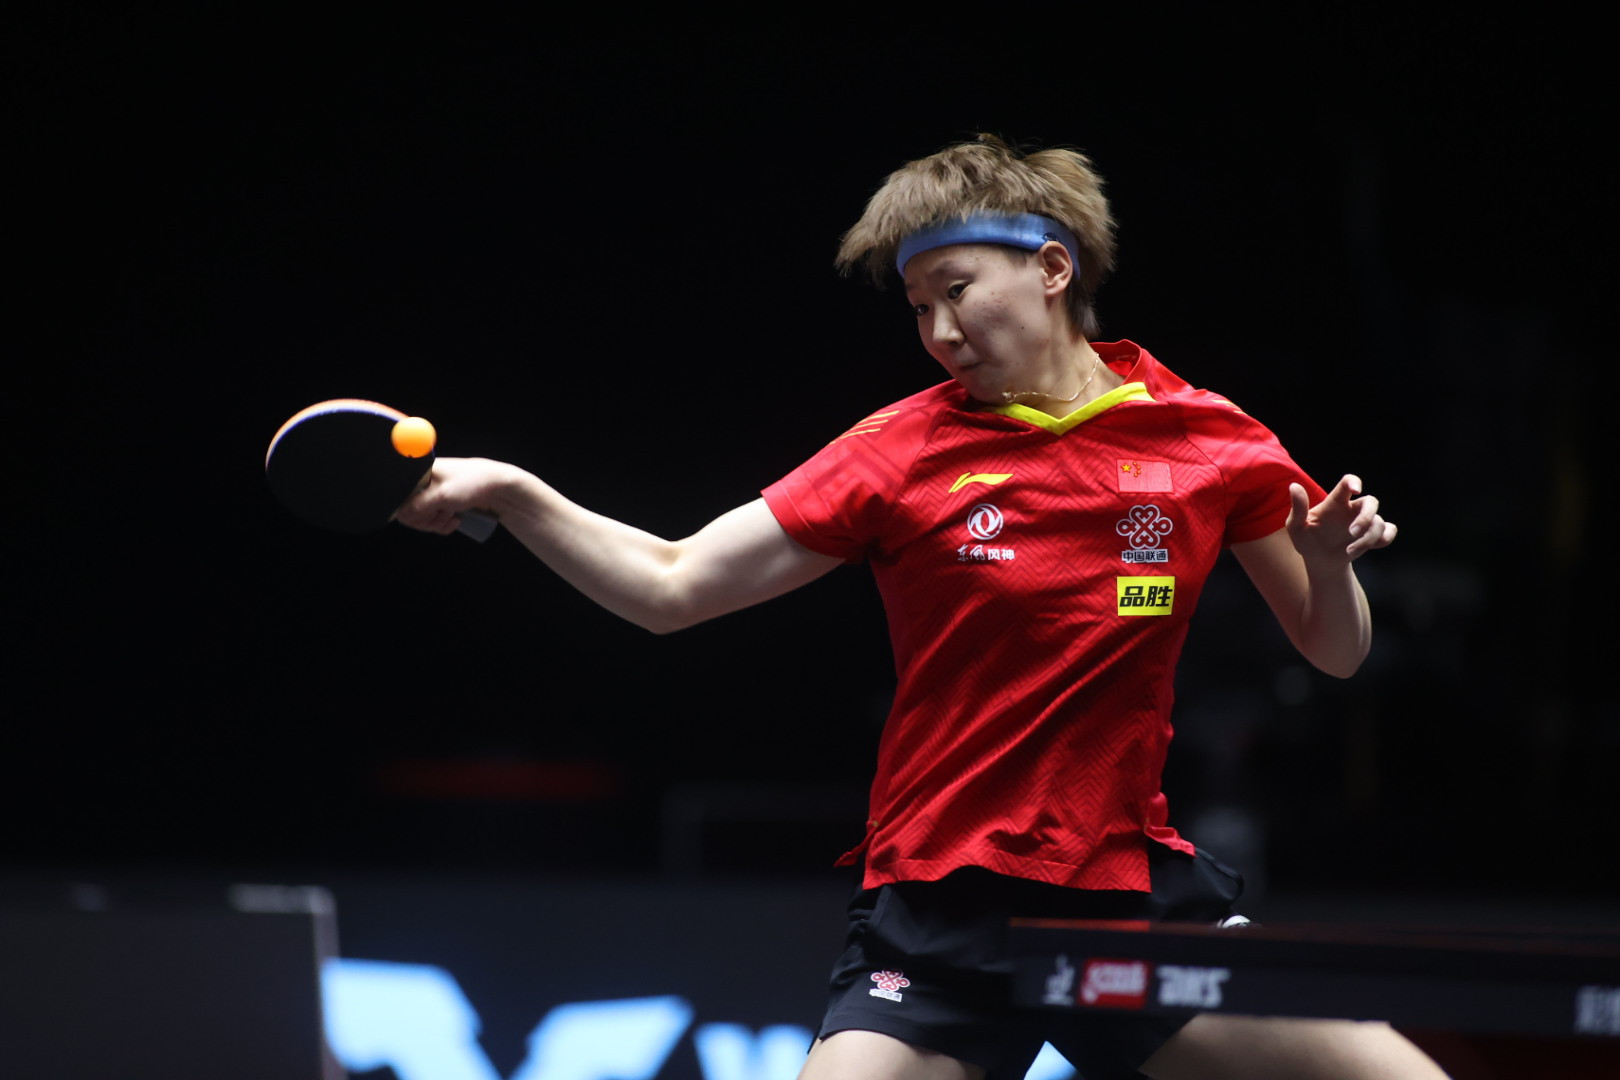 Wang Manyu was one of the winners in the top four seed matches in the evening session ©WTT